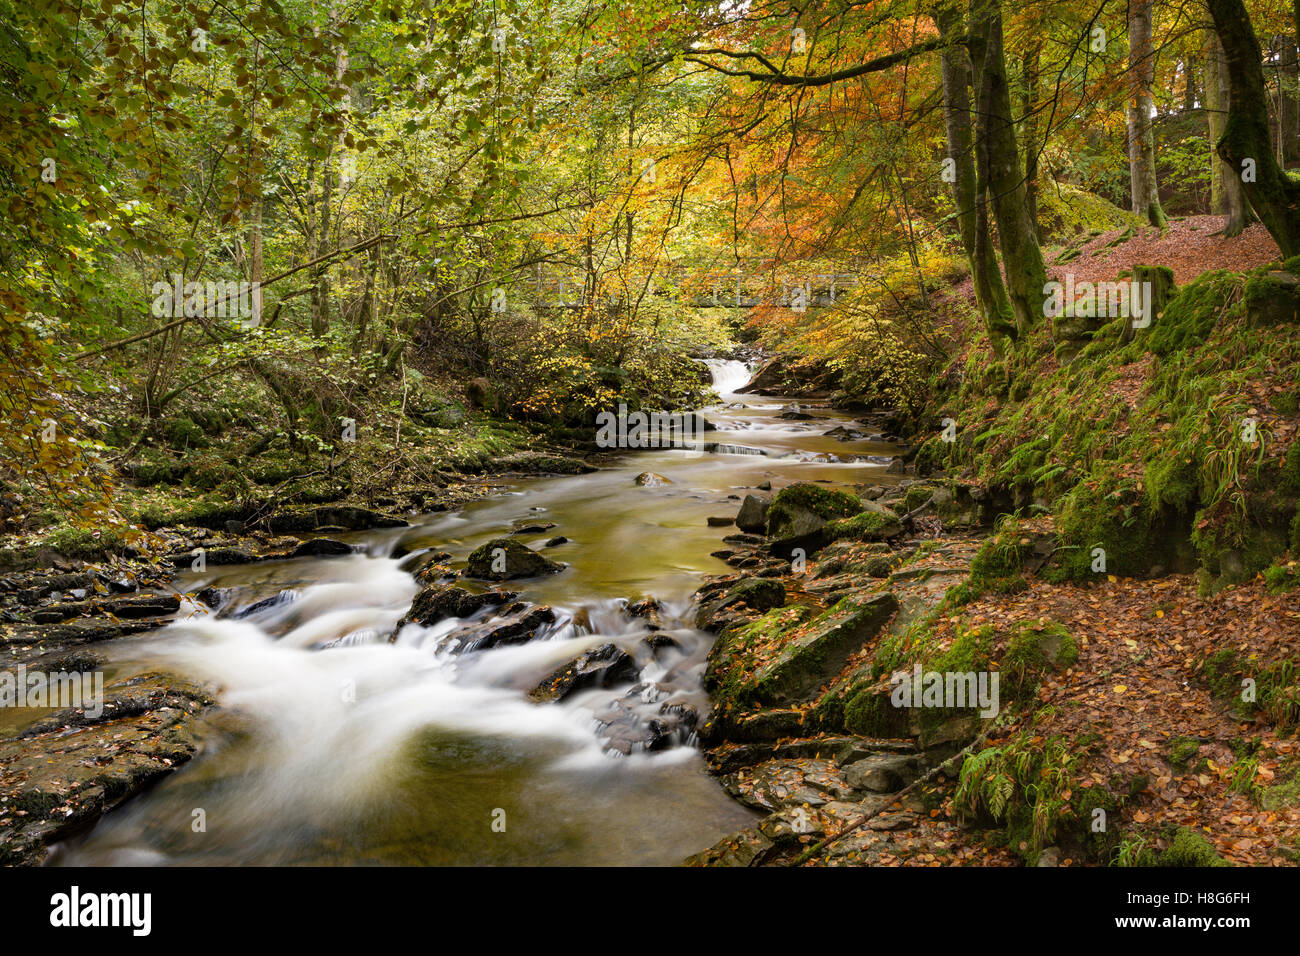 The Autumn colours of the leaves on the Beech trees at The Birks of Aberfeldy, Perthshire, Scotland. Stock Photo